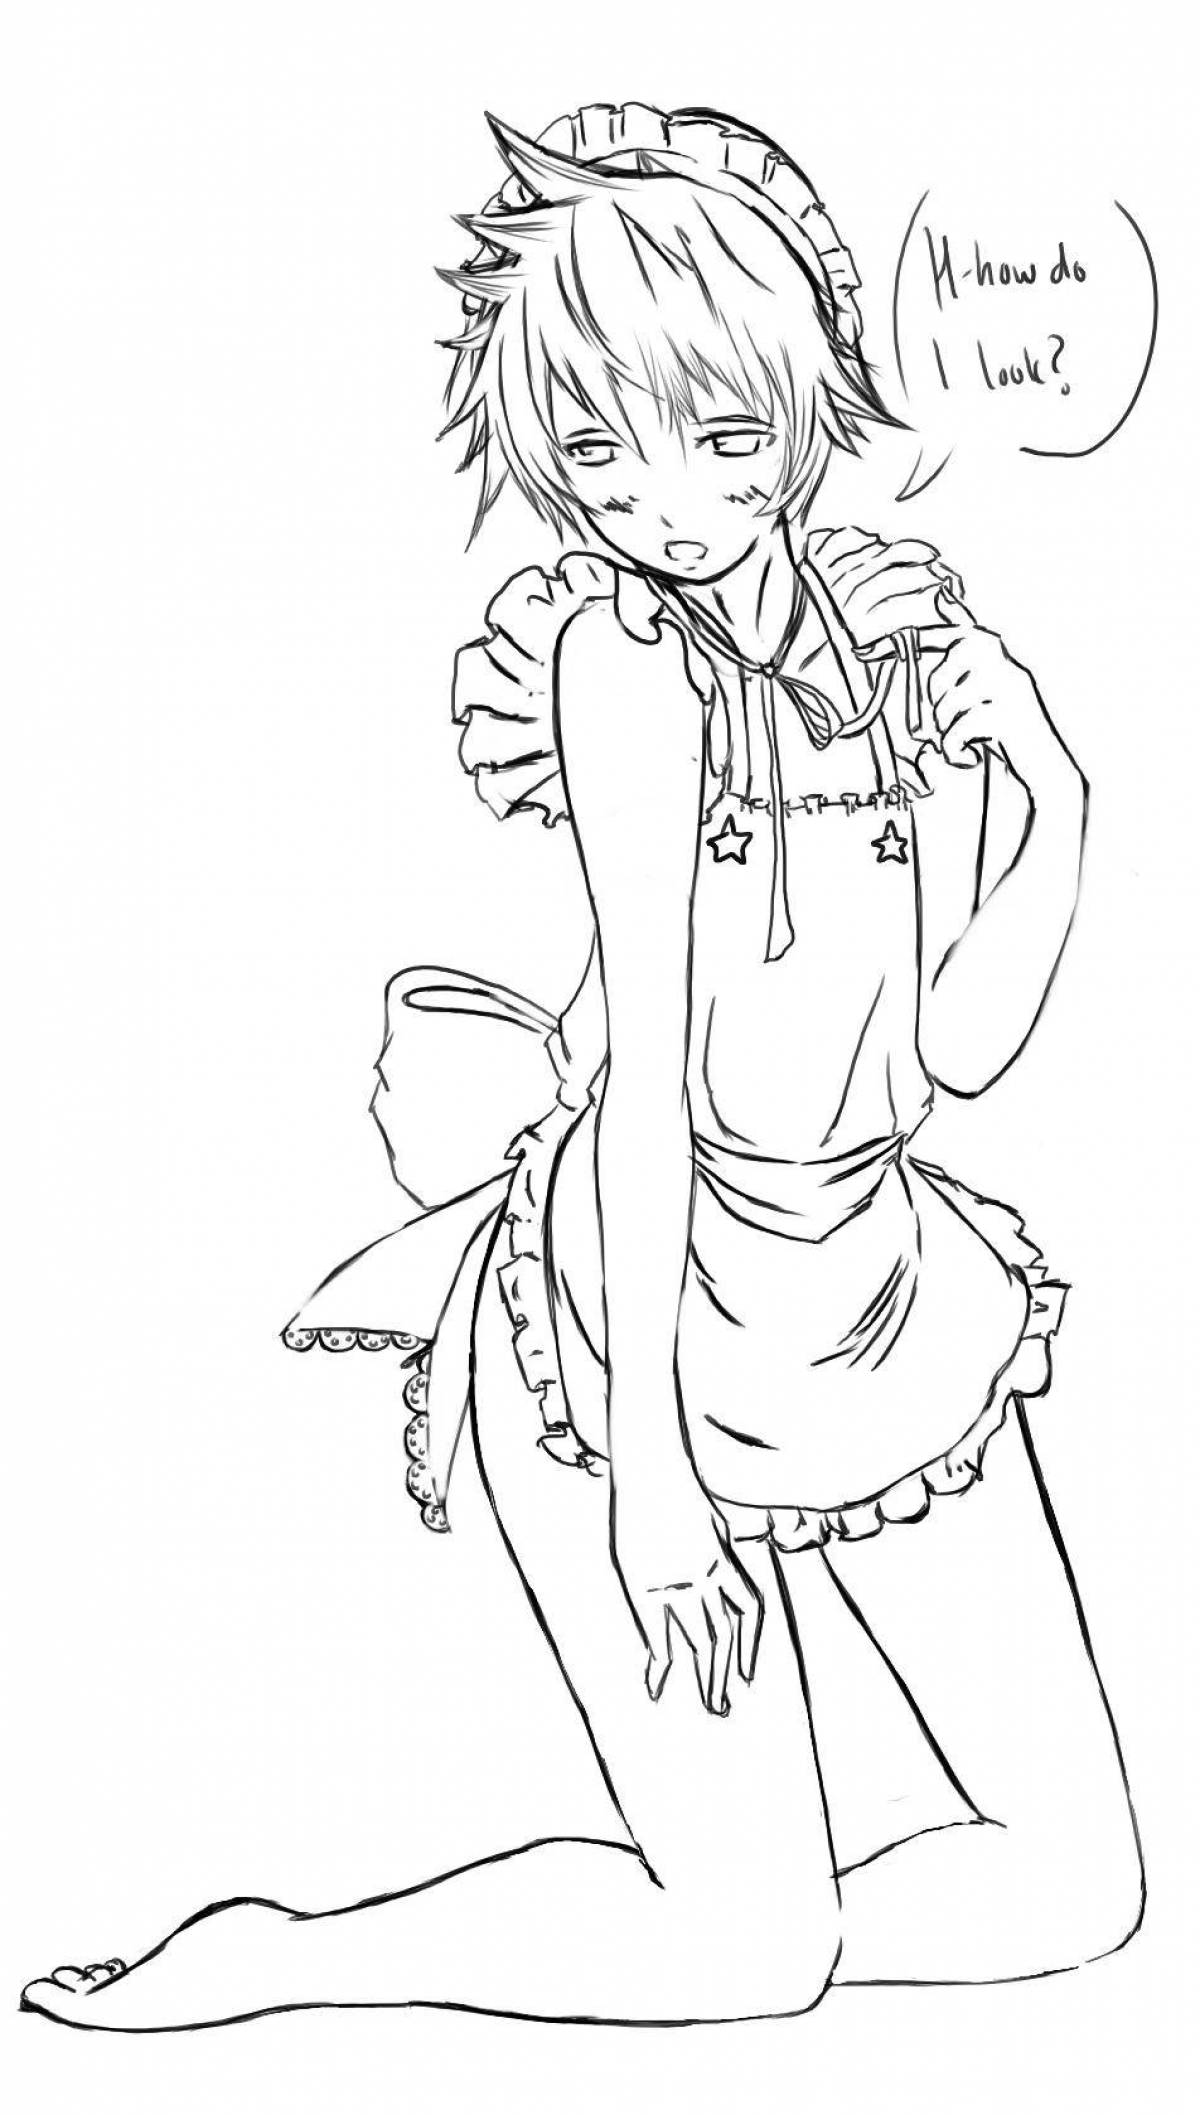 Charming anime maid coloring book